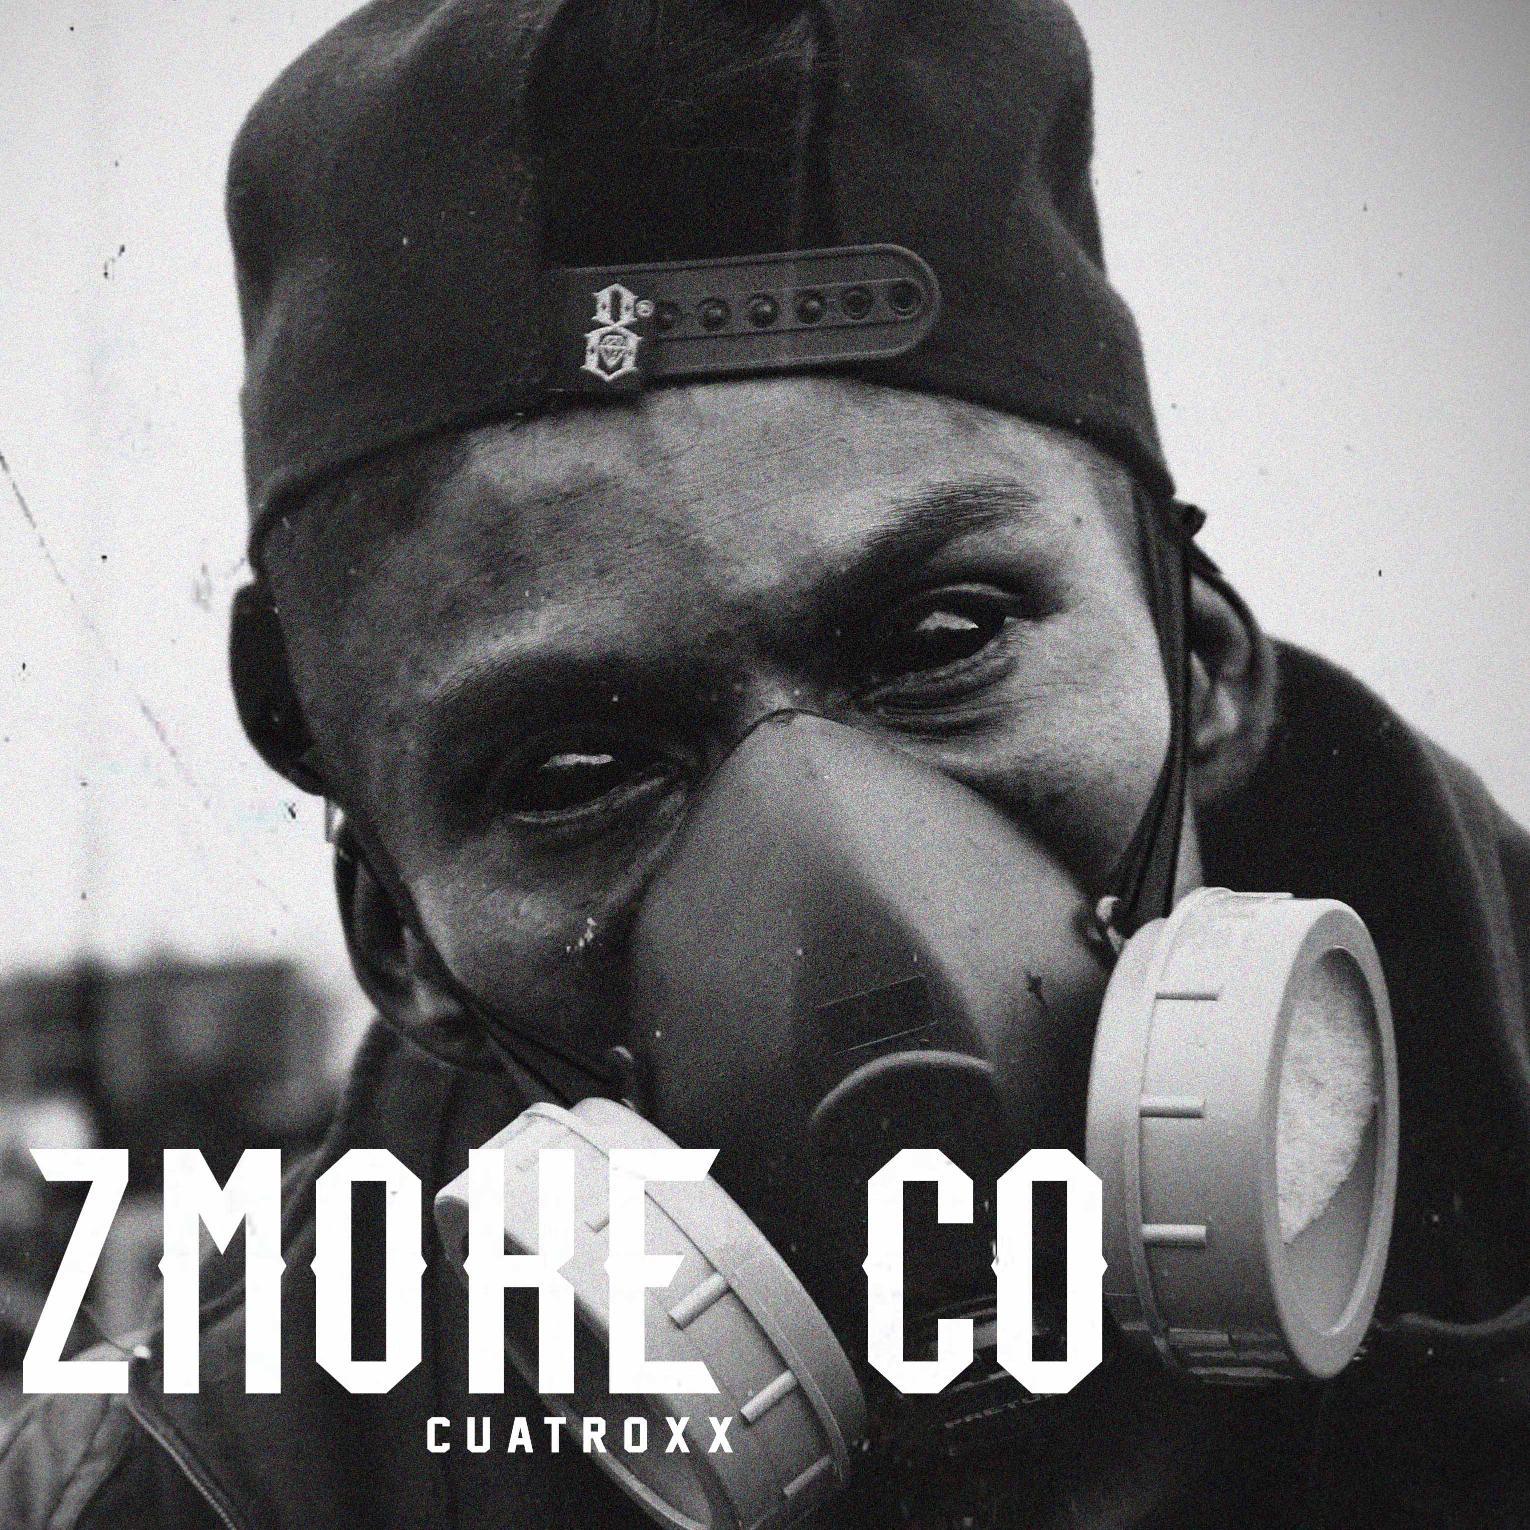 Dopest Latin Rap Label. #ZmokeCo #HipHop #RapLatino #HighLife @SoulEaterGang https://t.co/pSzBfY48uX